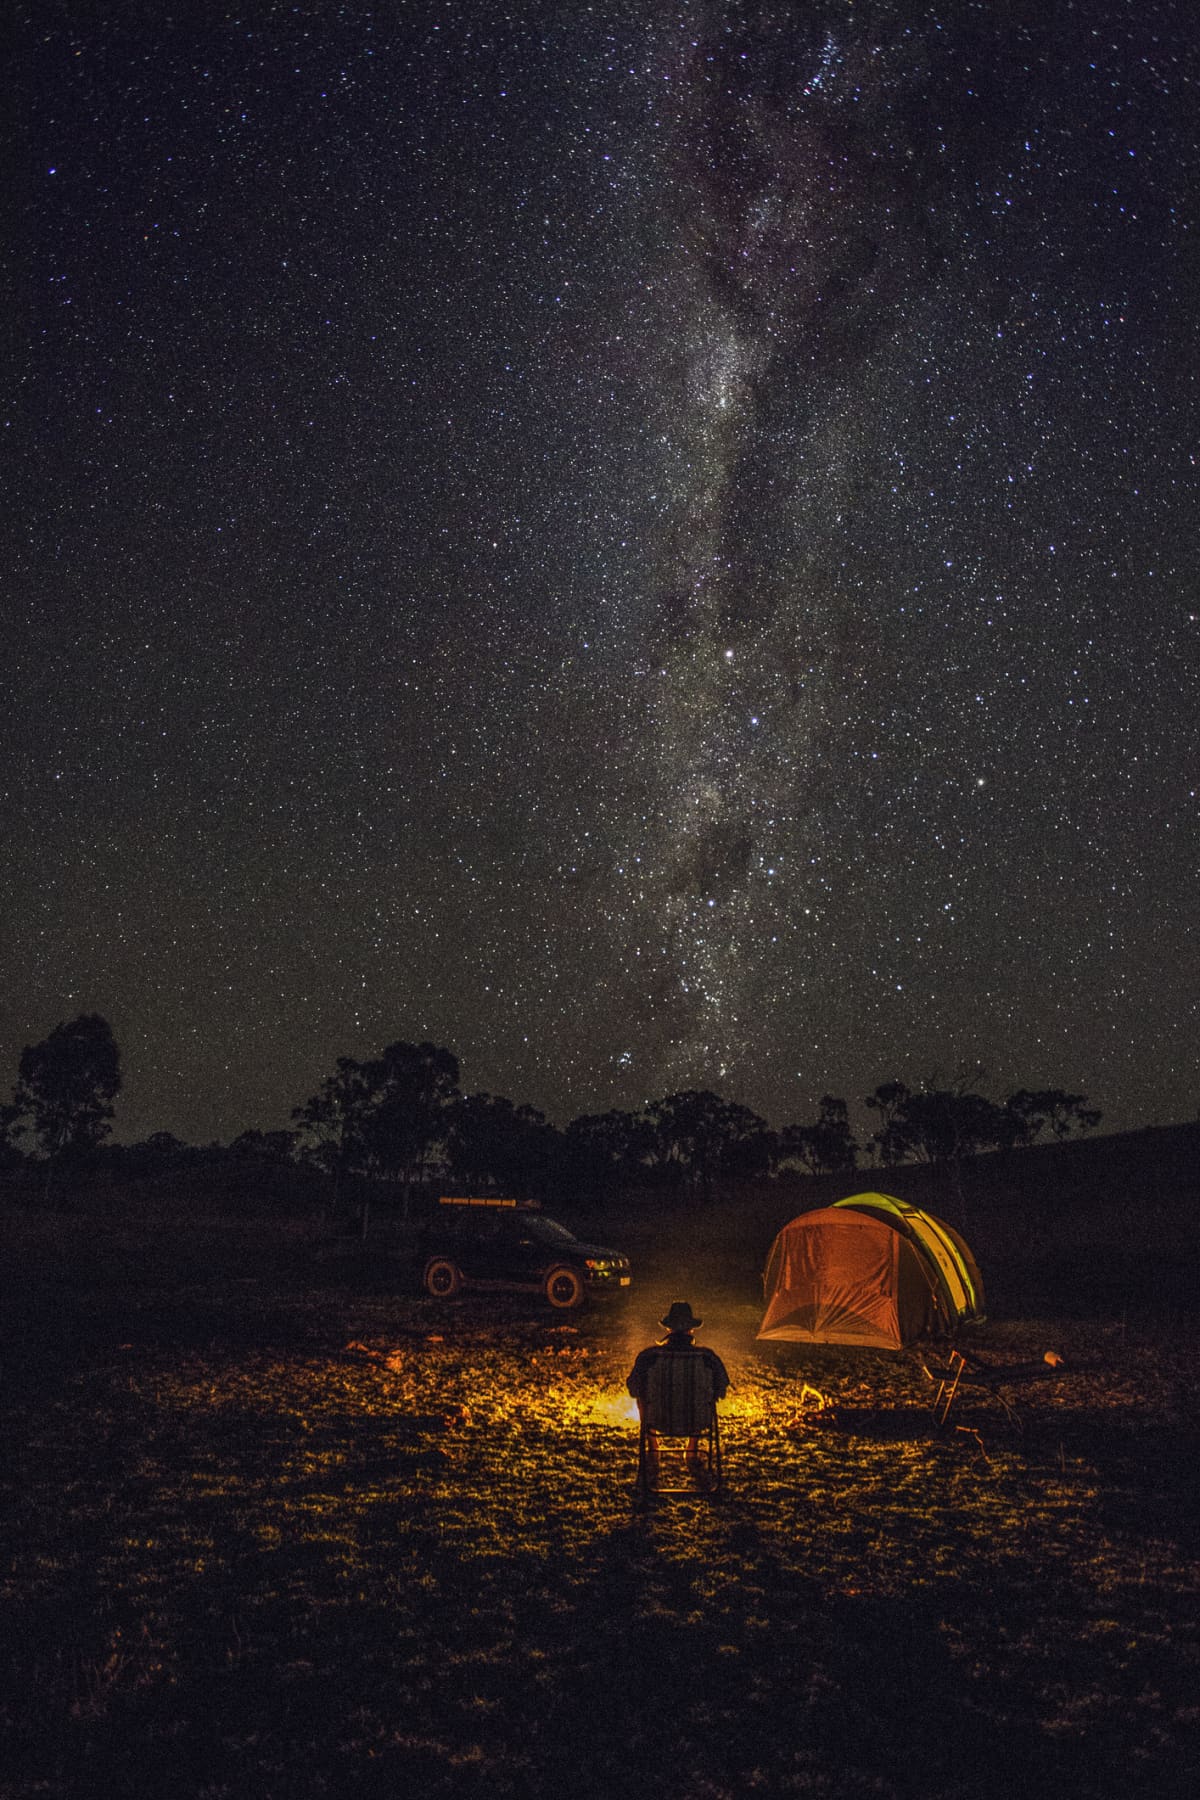 man sits in a folding chair next to a campsite under a sky filled with stars